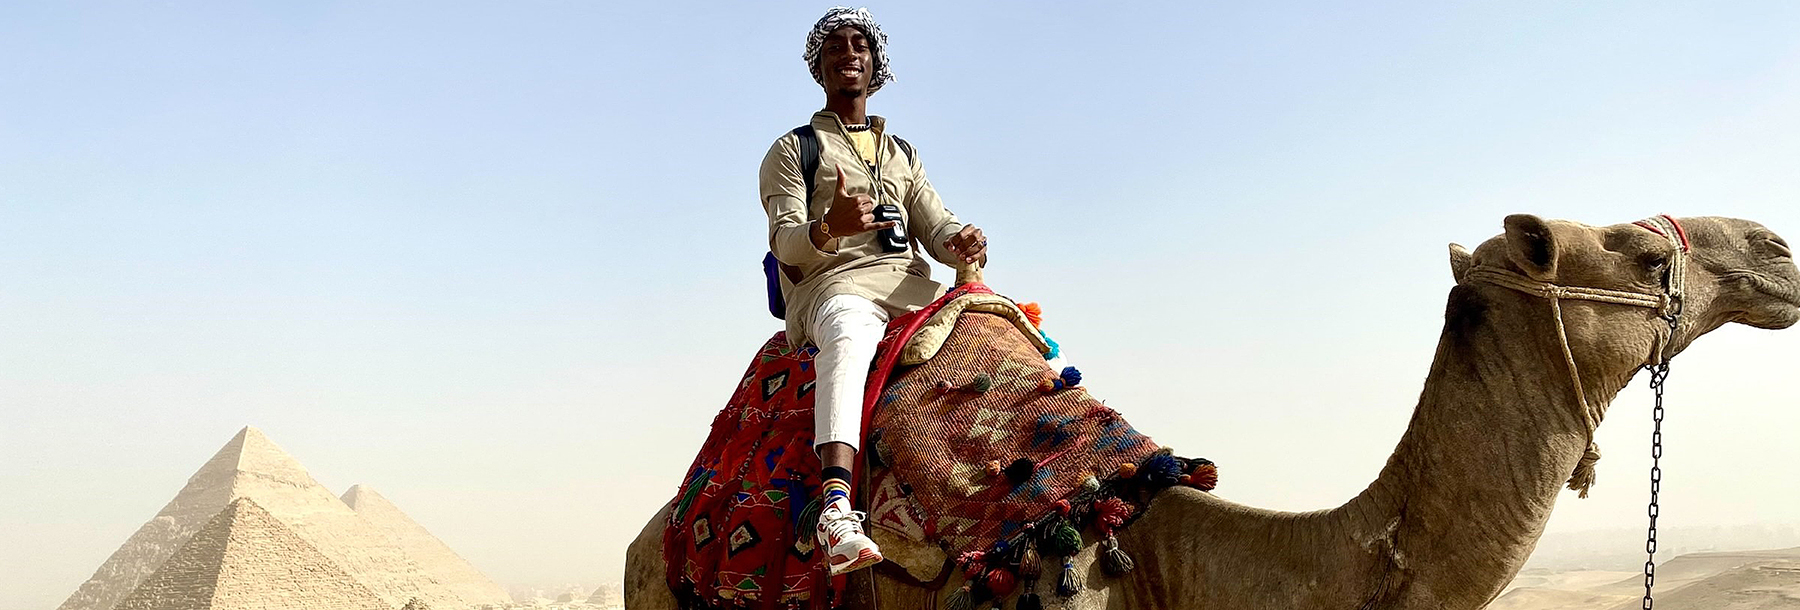 Section Image: Rasaan Hatcher riding a camel by the Pyramids 